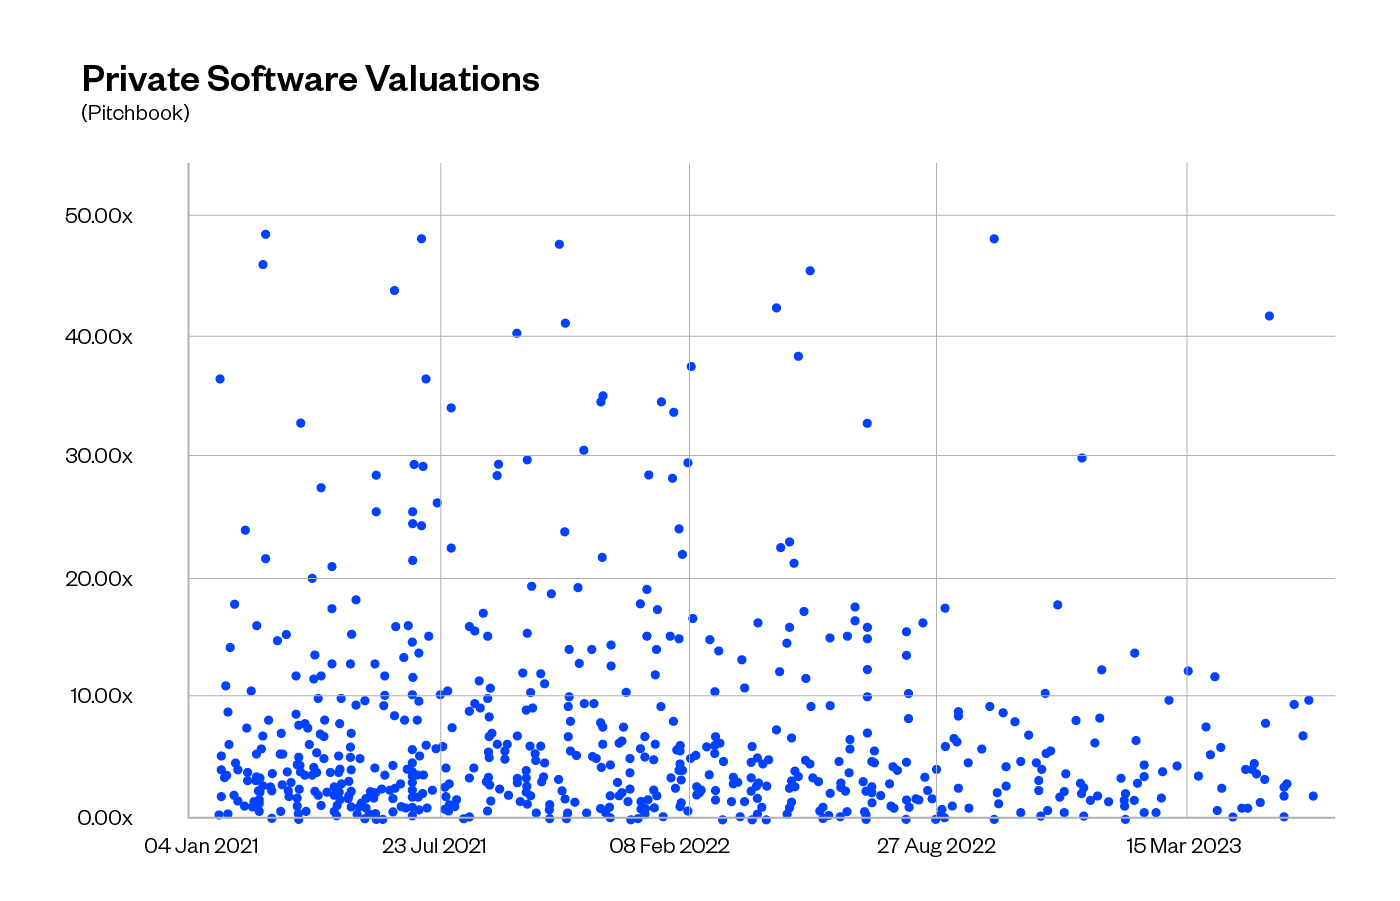 A scatter chart showing public software valuations from Q1 2021 through Q2 2023